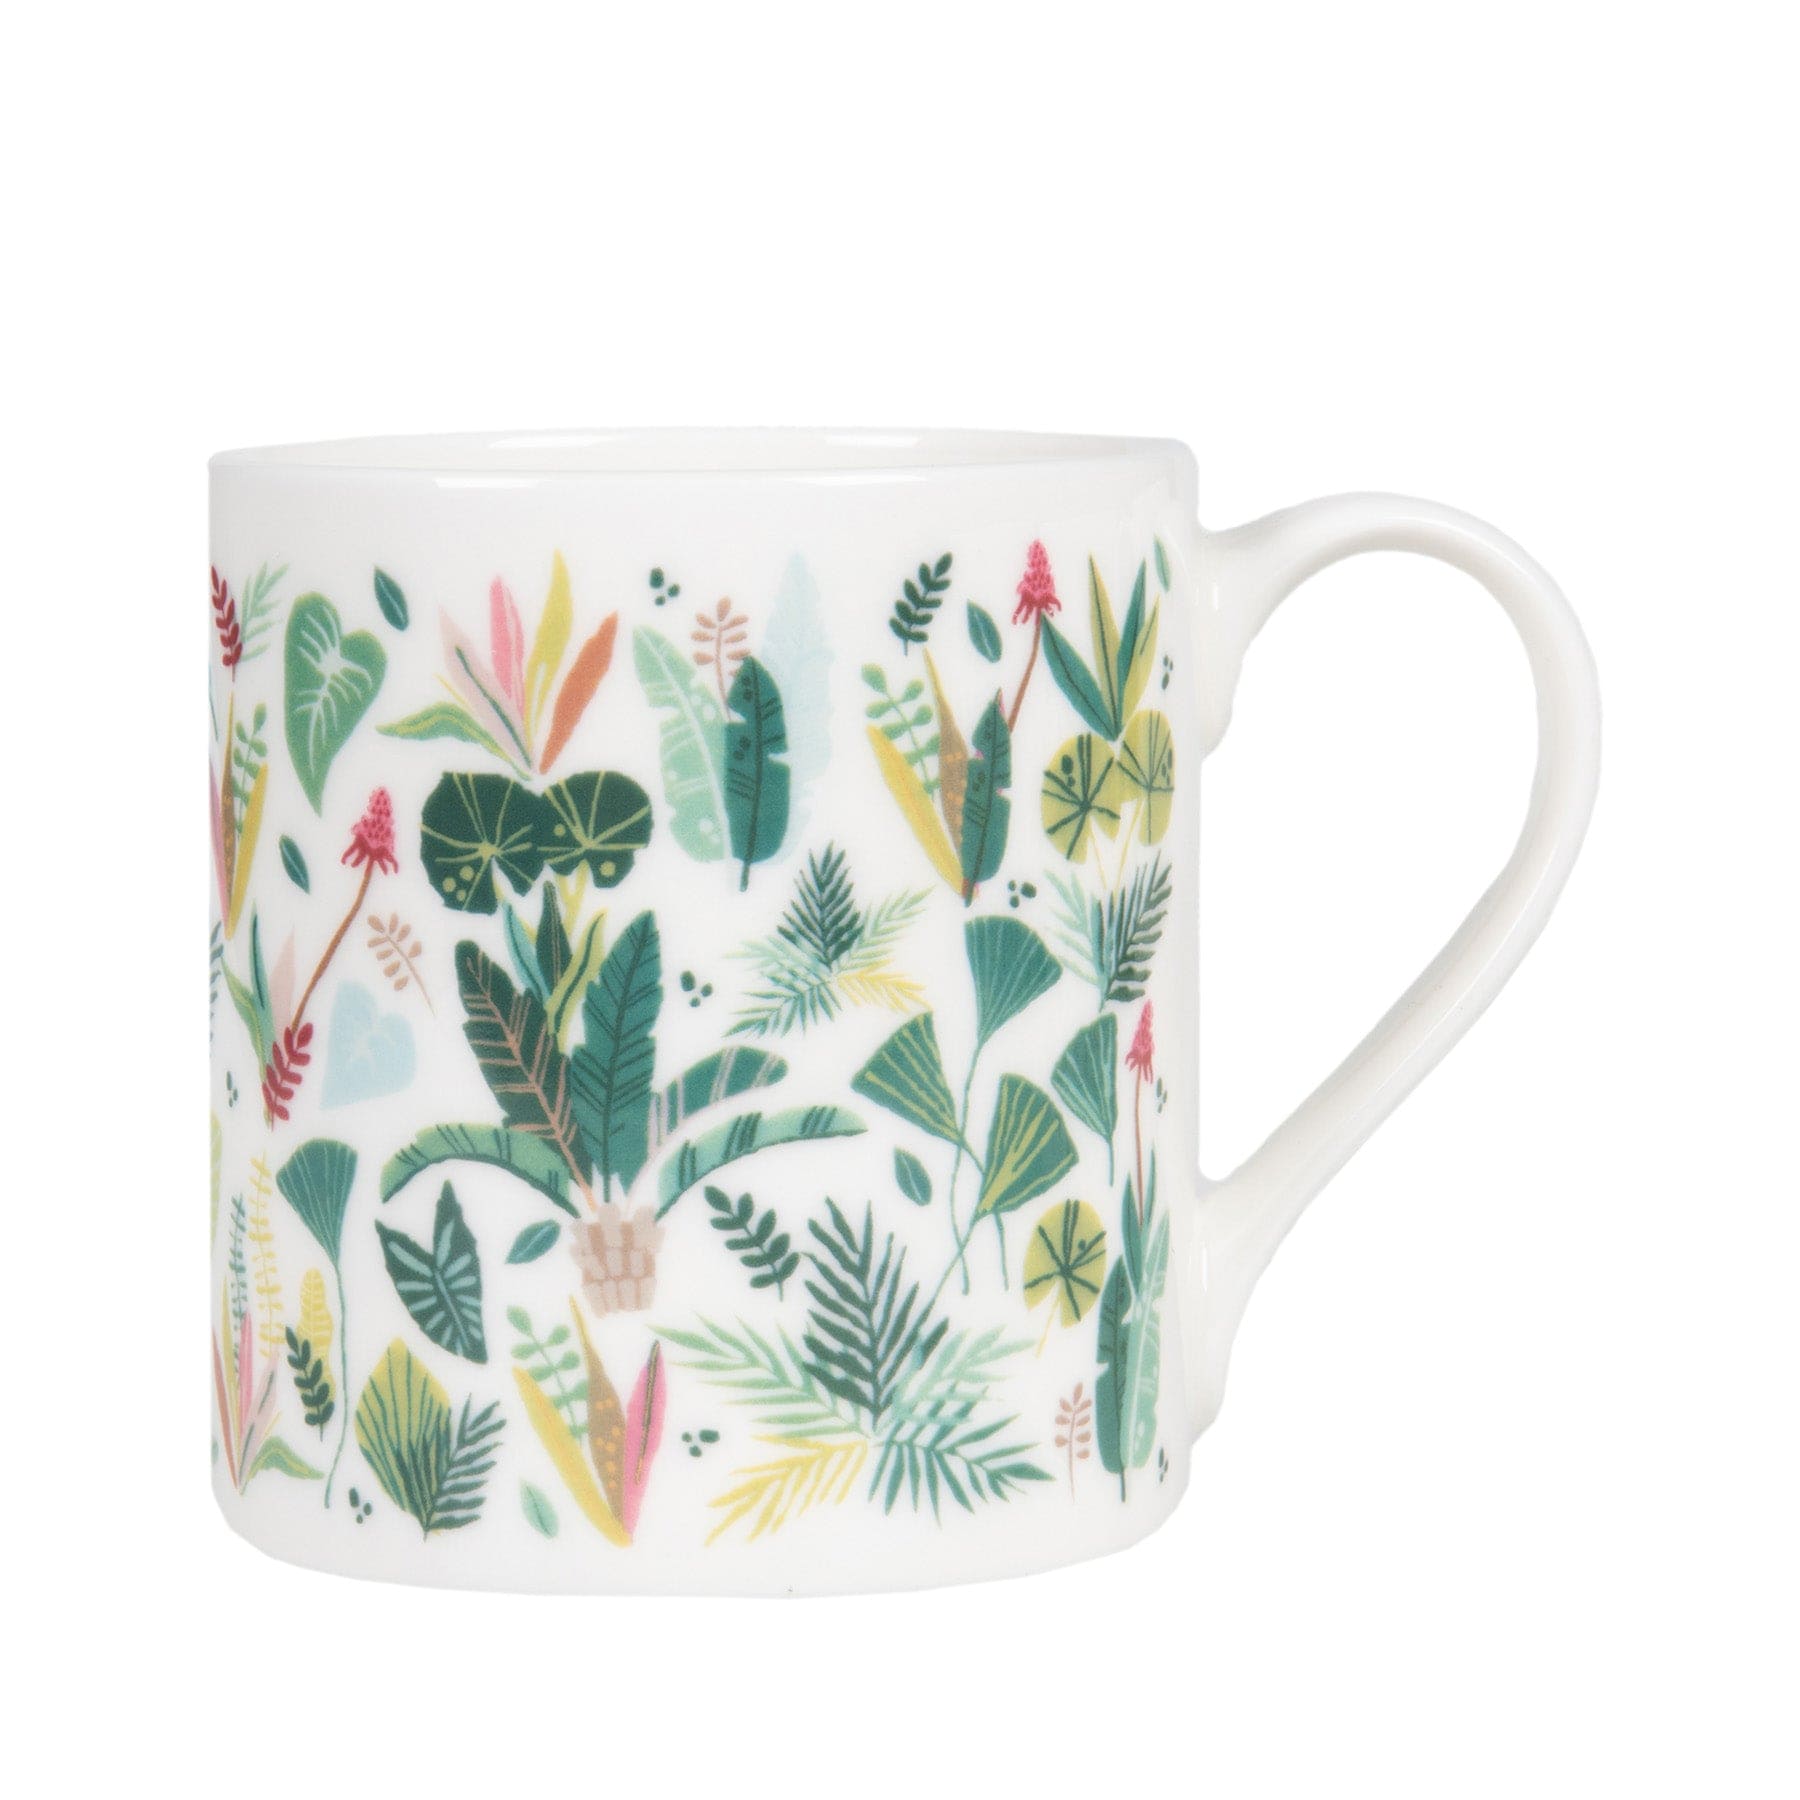 Ceramic mug with tropical botanical print, featuring various green leaves and floral patterns, isolated on white background